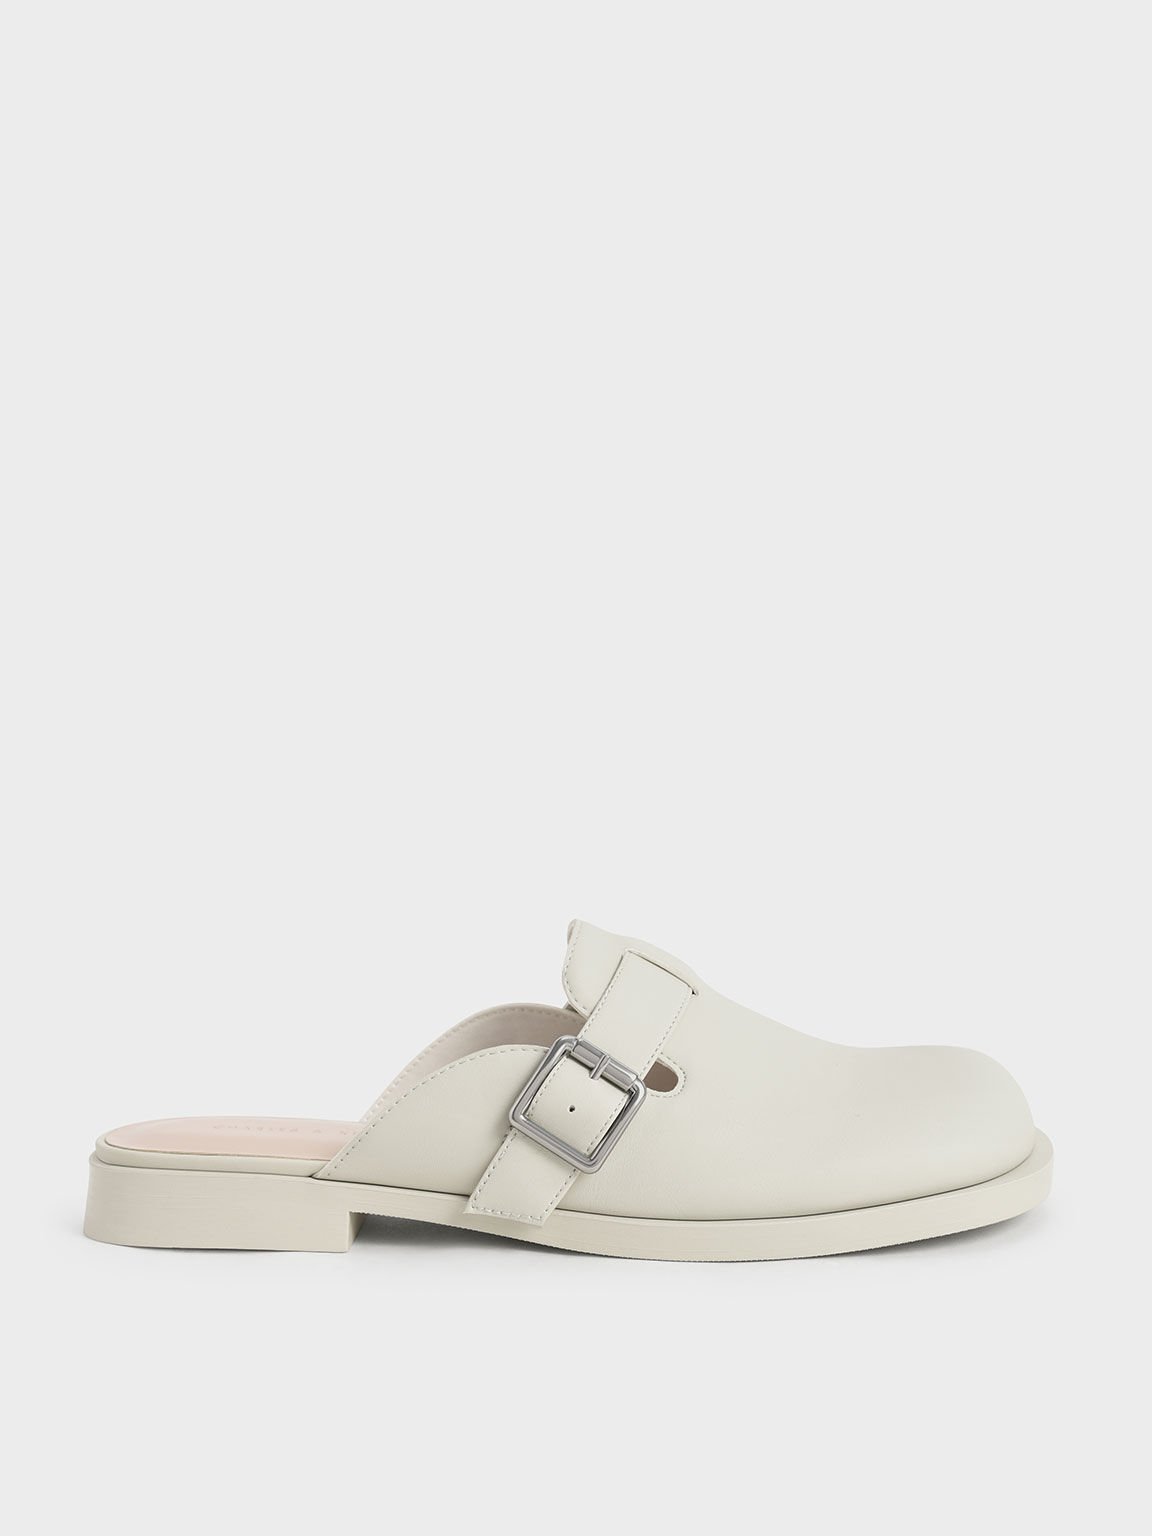 Buckled Round-Toe Loafer Mules, Chalk, hi-res